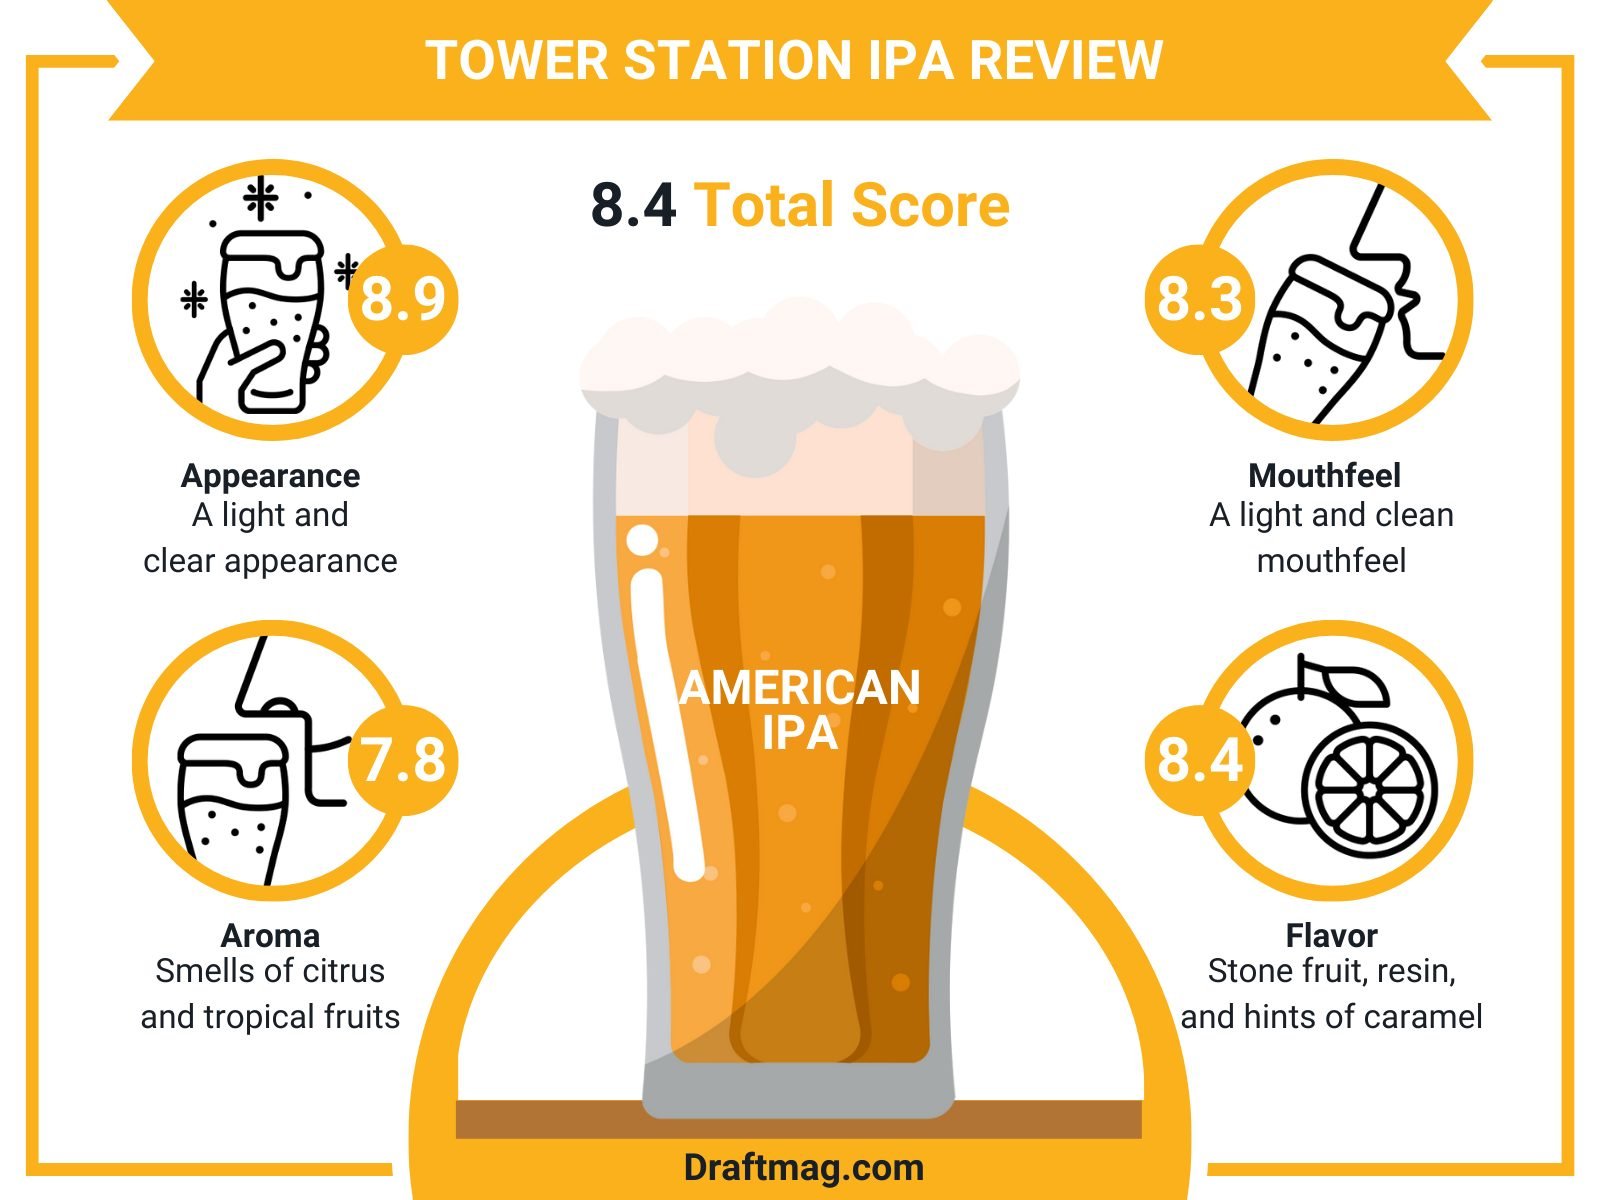 Tower Station Review Infographic